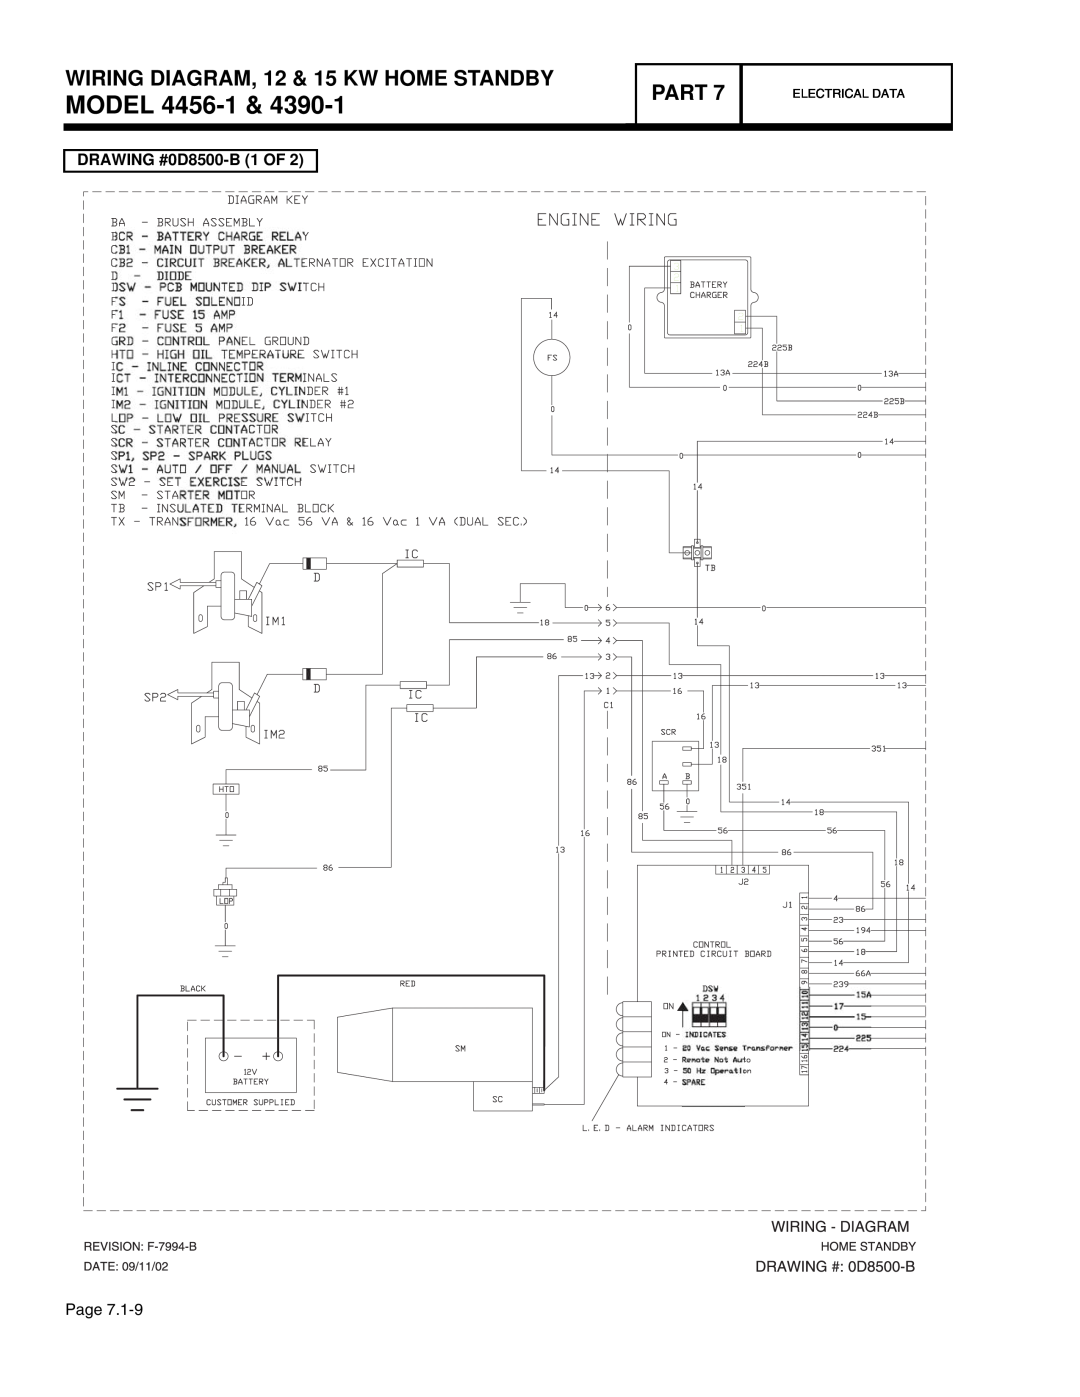 Guardian Technologies 4390, 4389, 4760 MODEL 4456-1, WIRING DIAGRAM, 12 & 15 KW HOME STANDBY, Part, DRAWING #0D8500-B 1 OF 